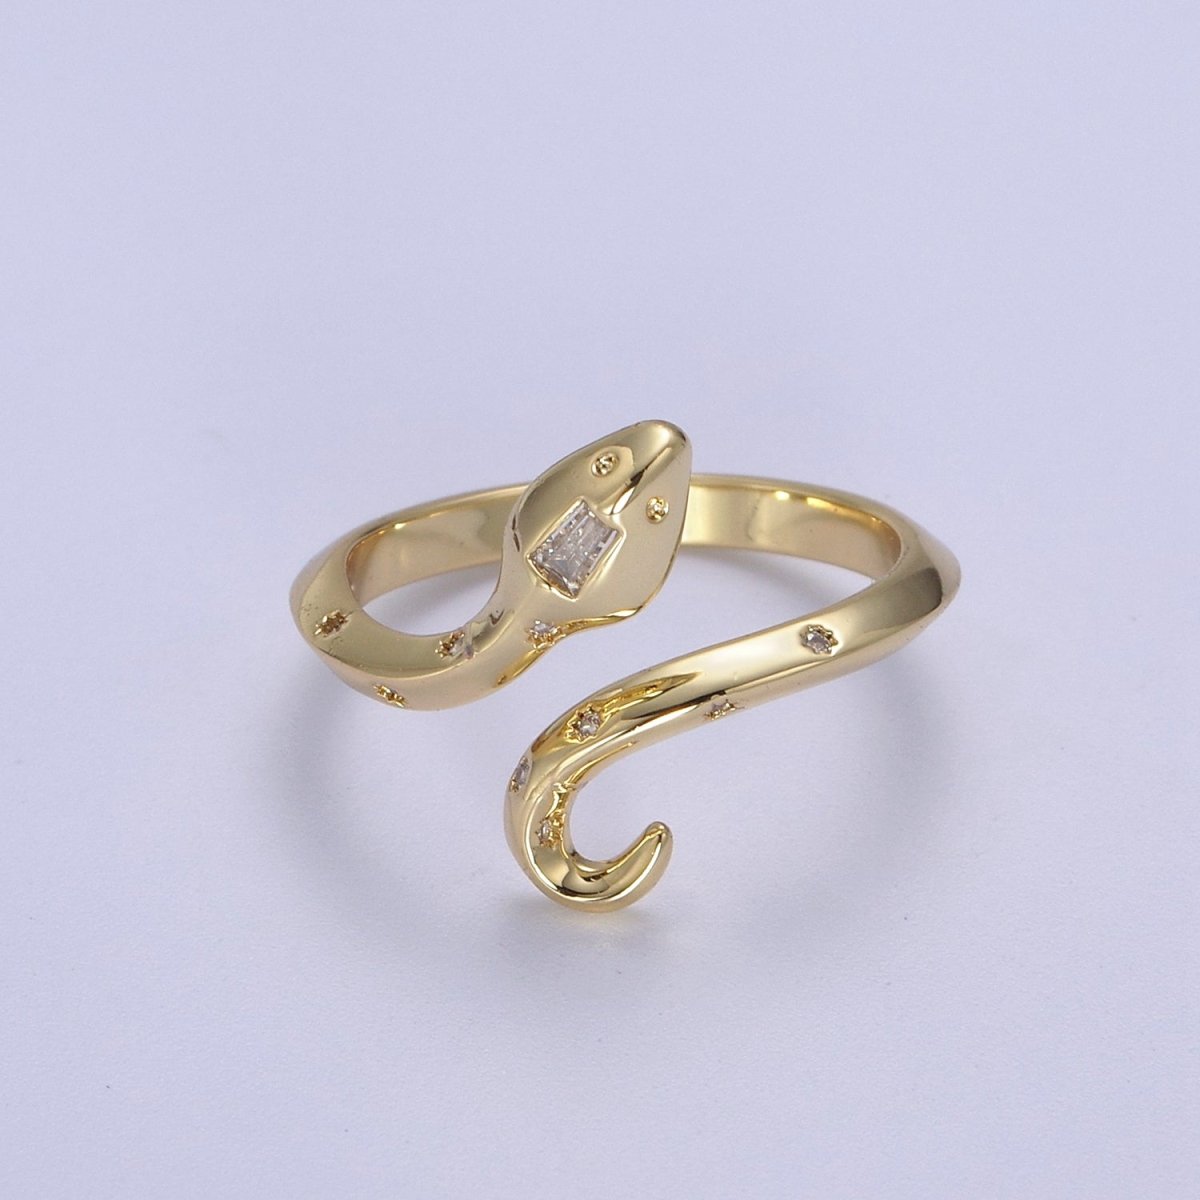 24K Gold Filled Serpent Ring, Adjustable Micro Pave Zirconia CZ Snake Ring, Dainty Curling Snake Jewelry U-464 - DLUXCA